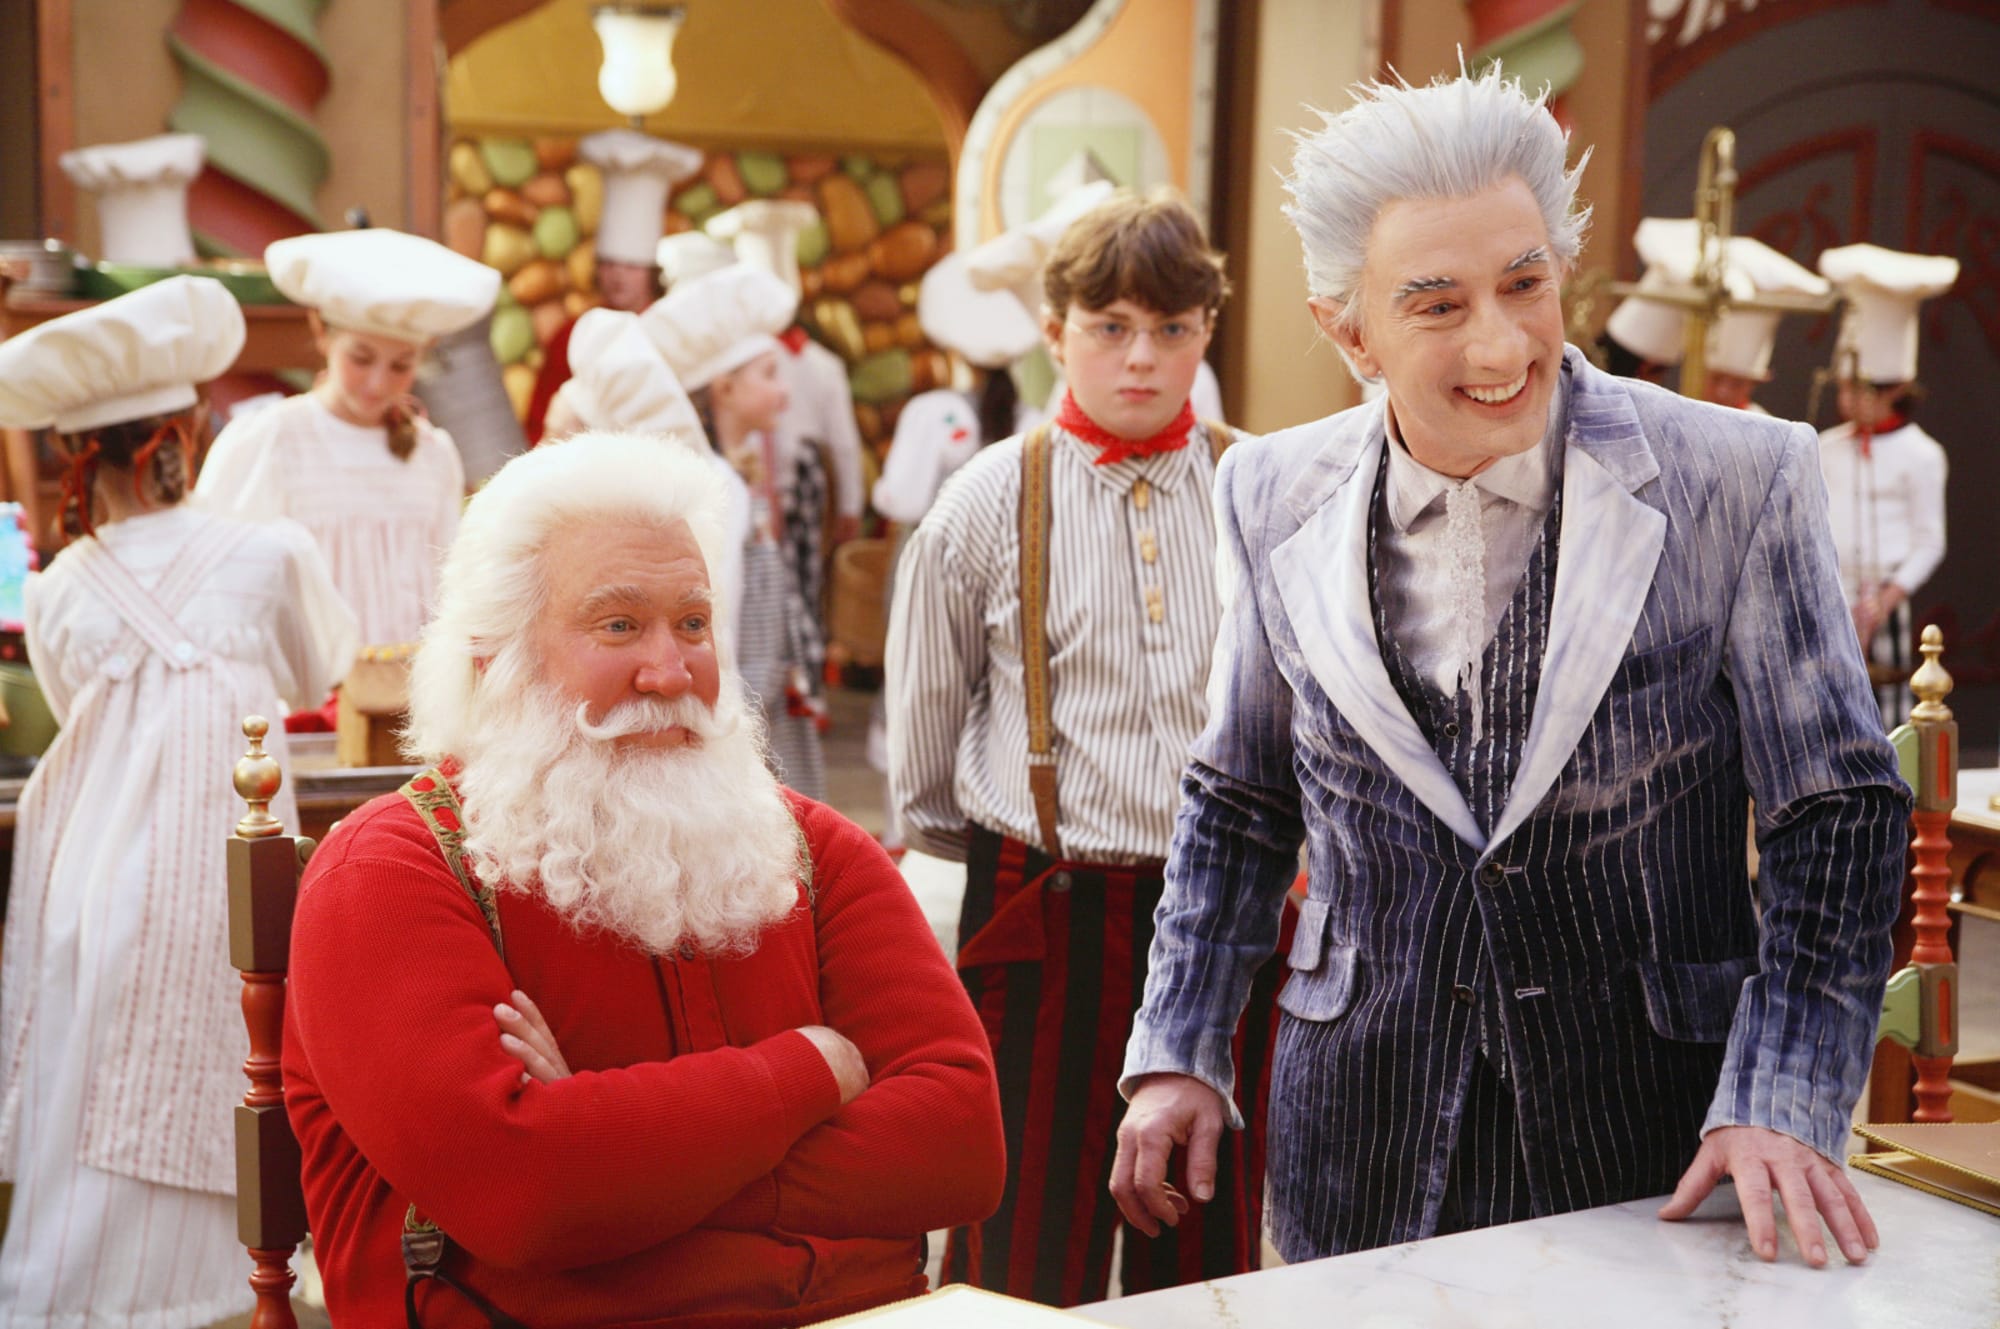 Is The Santa Clause 3 on Netflix?